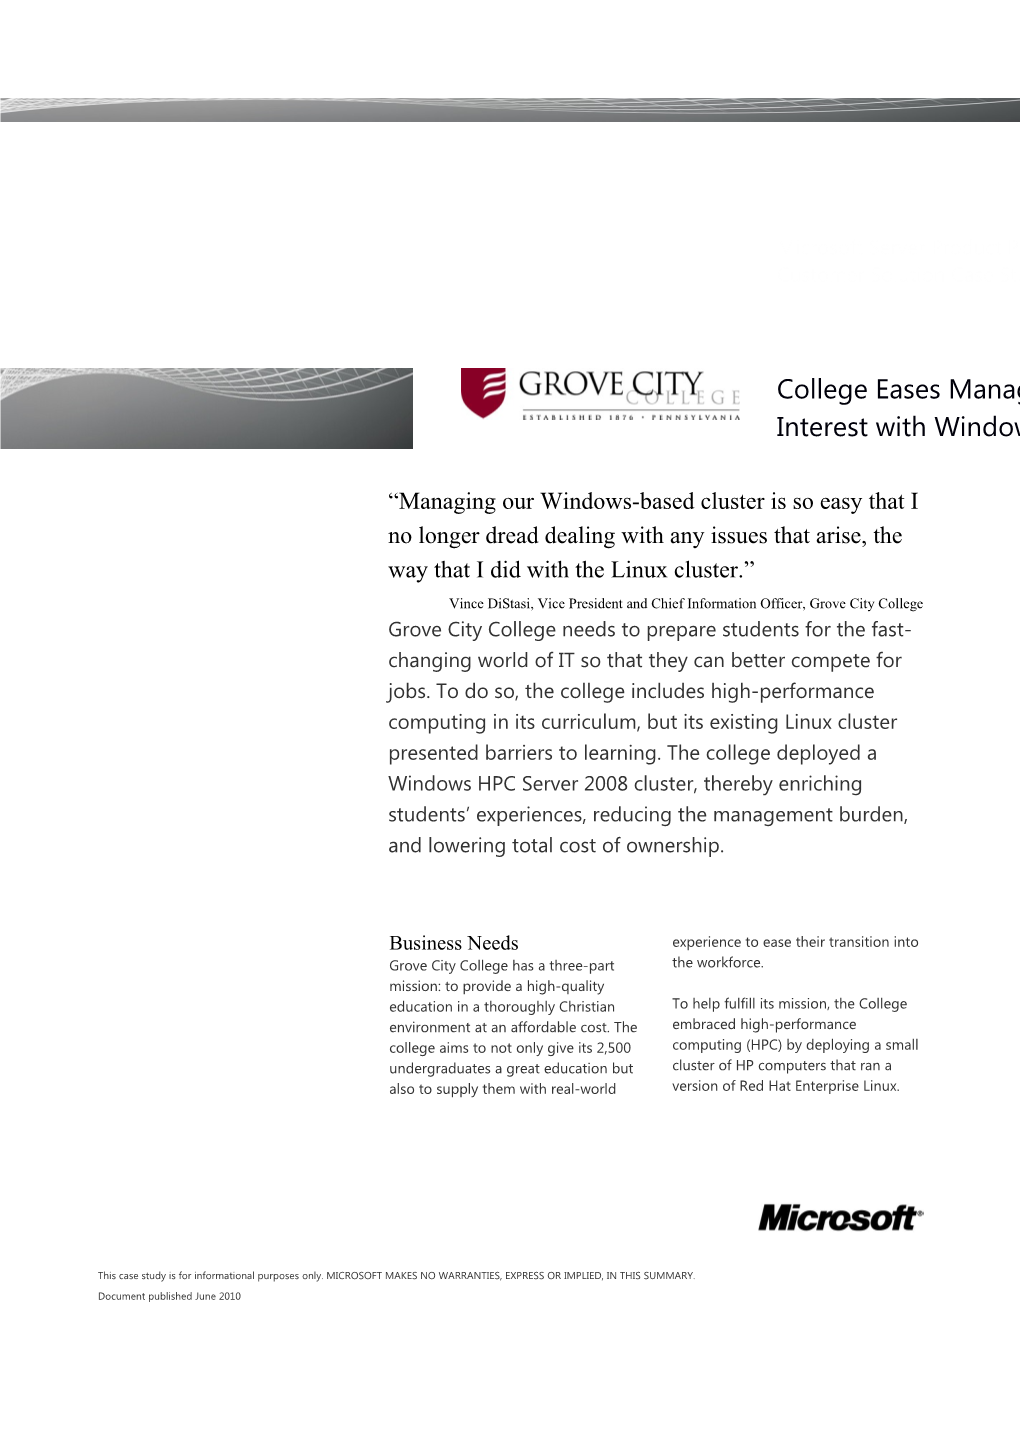 College Eases Management, Fosters Student Interest with Windows HPC Server 2008